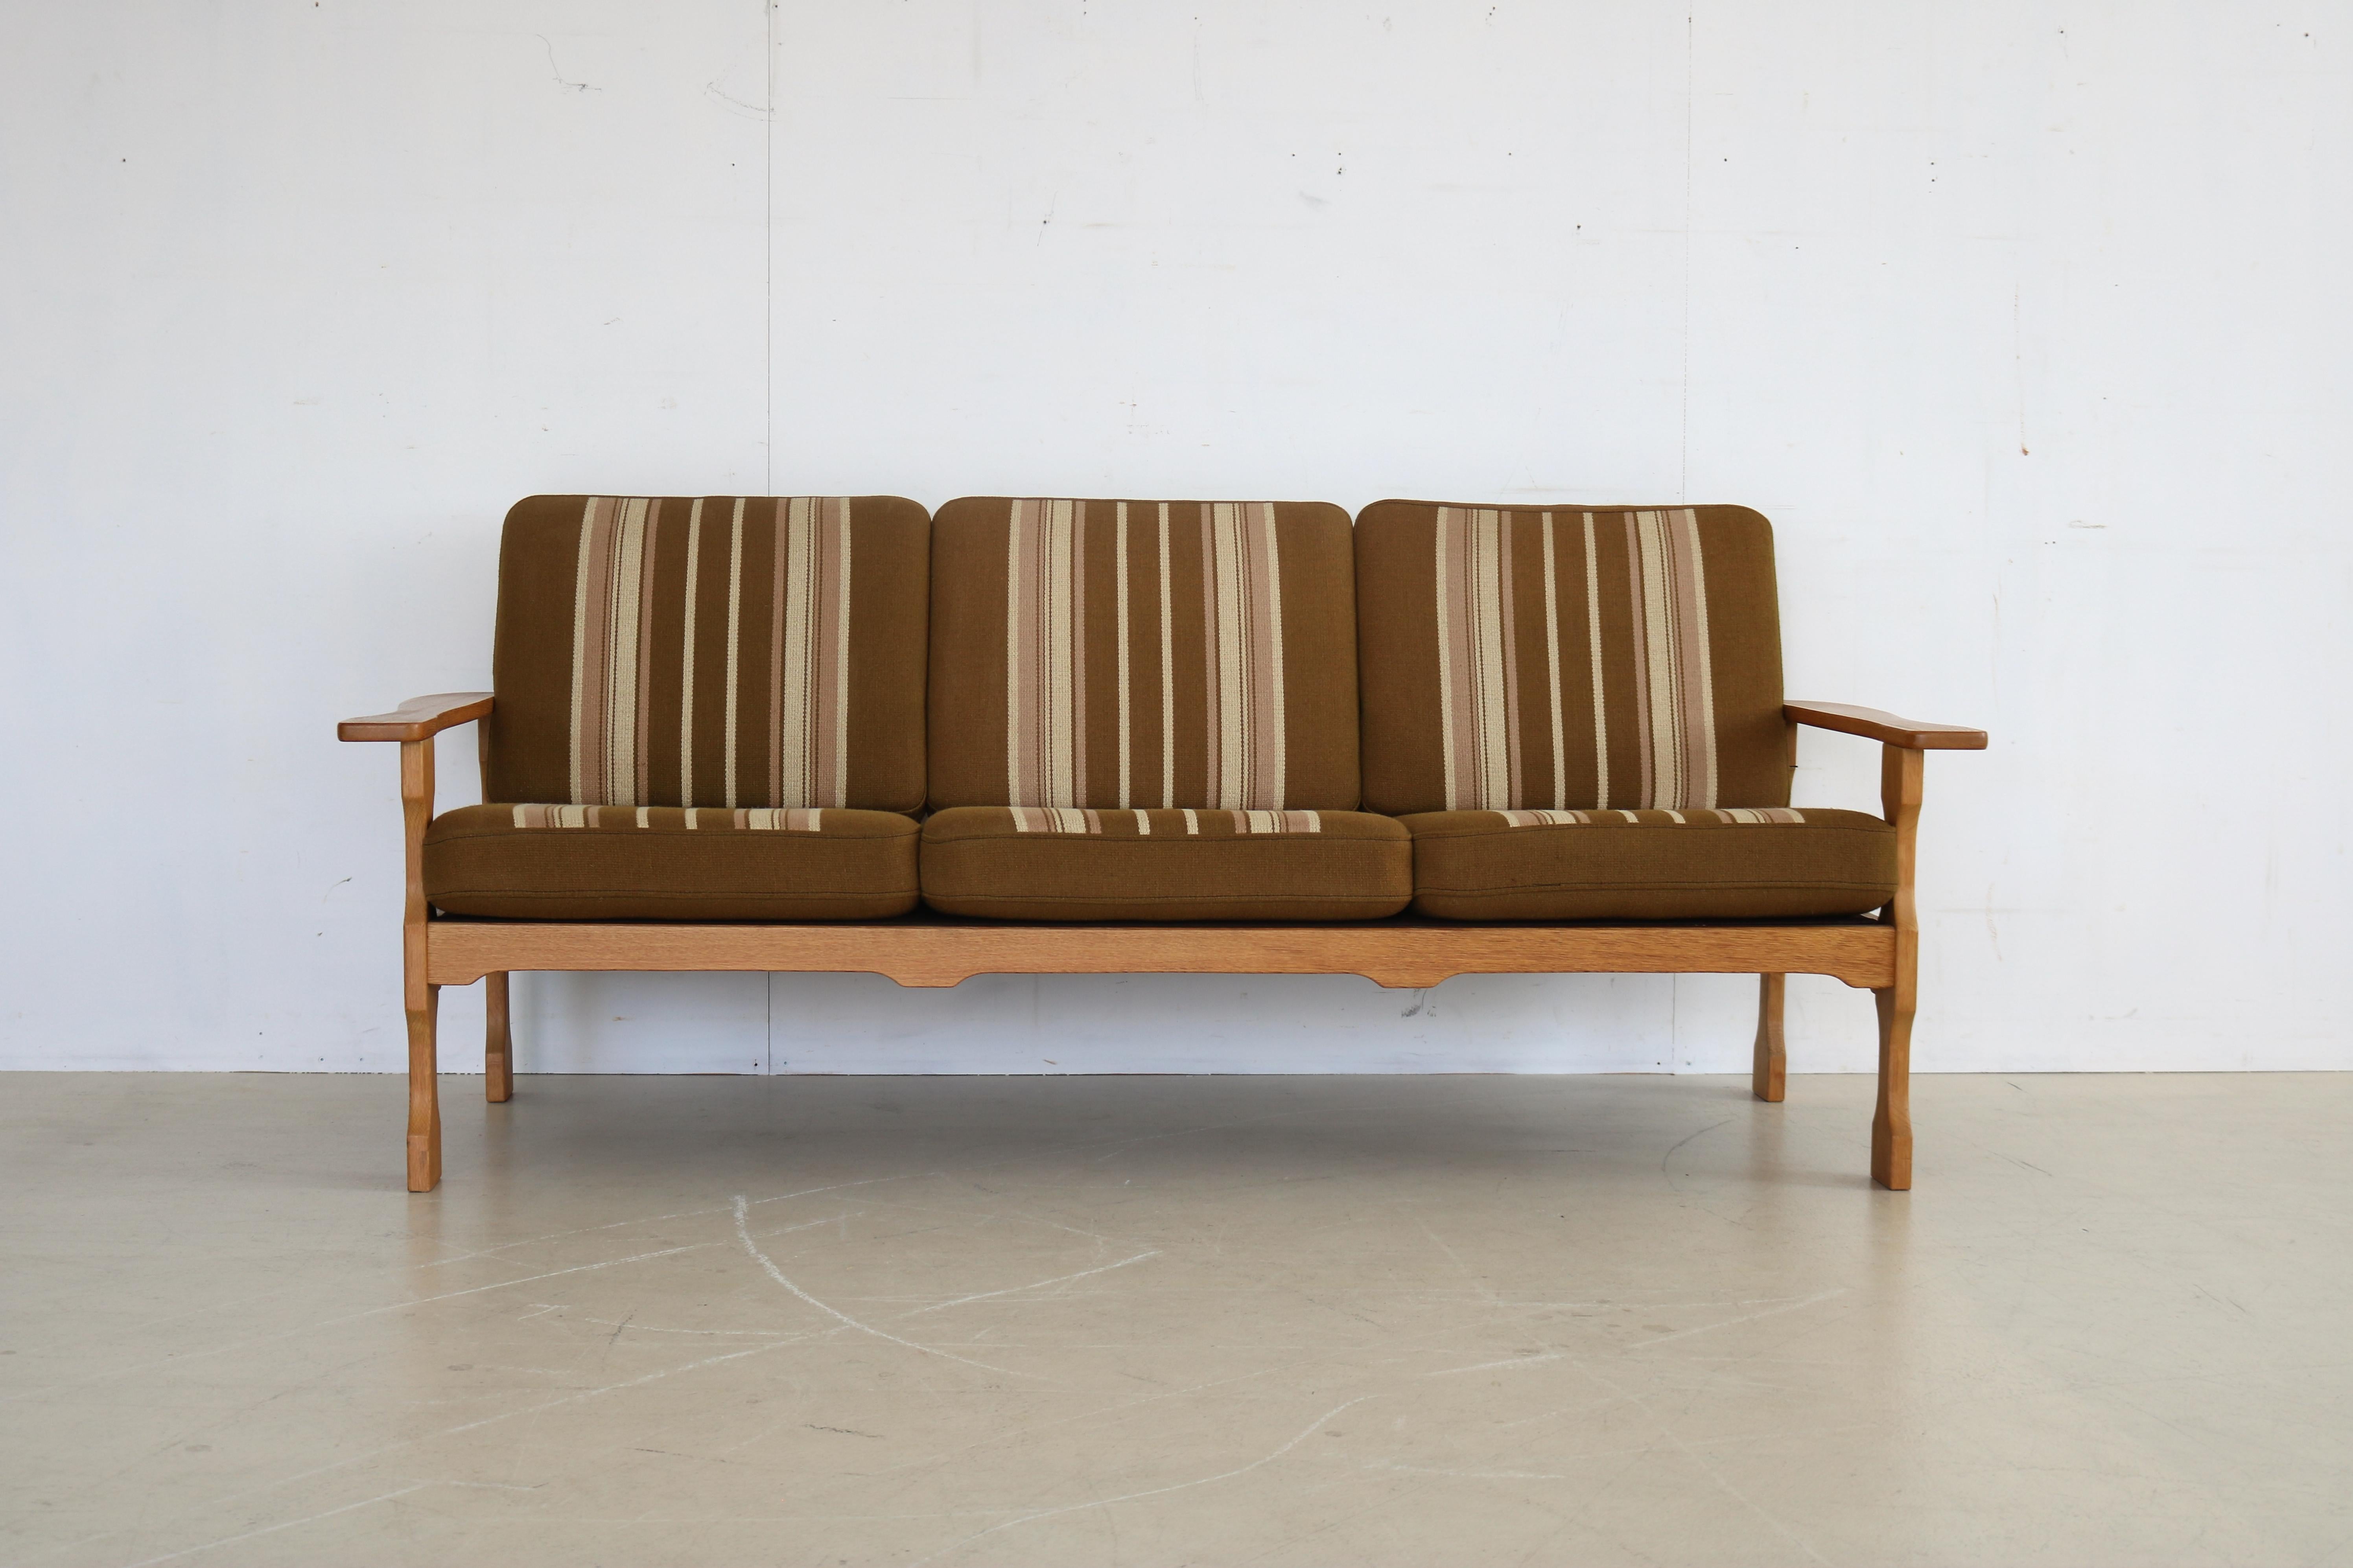 Vintage oak seating area couch easy chairs 1950s, Danish

Sitting area from Denmark consisting of a sofa, two easy chairs and a coffee table.

Period 1960s
Designs unknown denmark condition good light signs of use.

Size couch 75 x 177 x 80